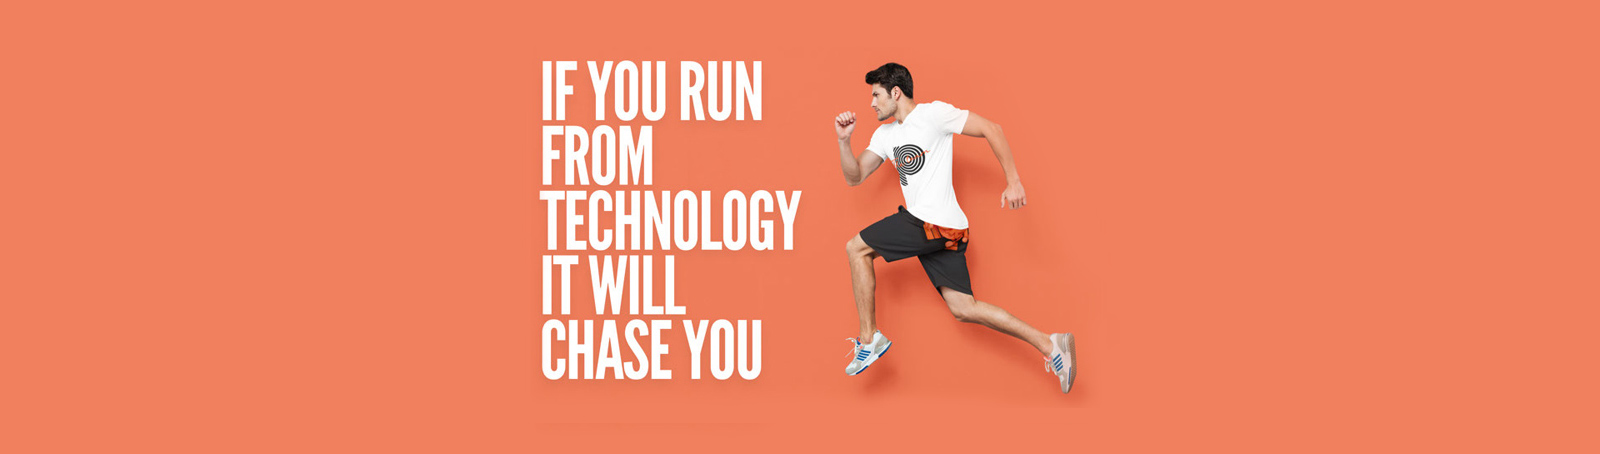 If you run from technology it will chase you